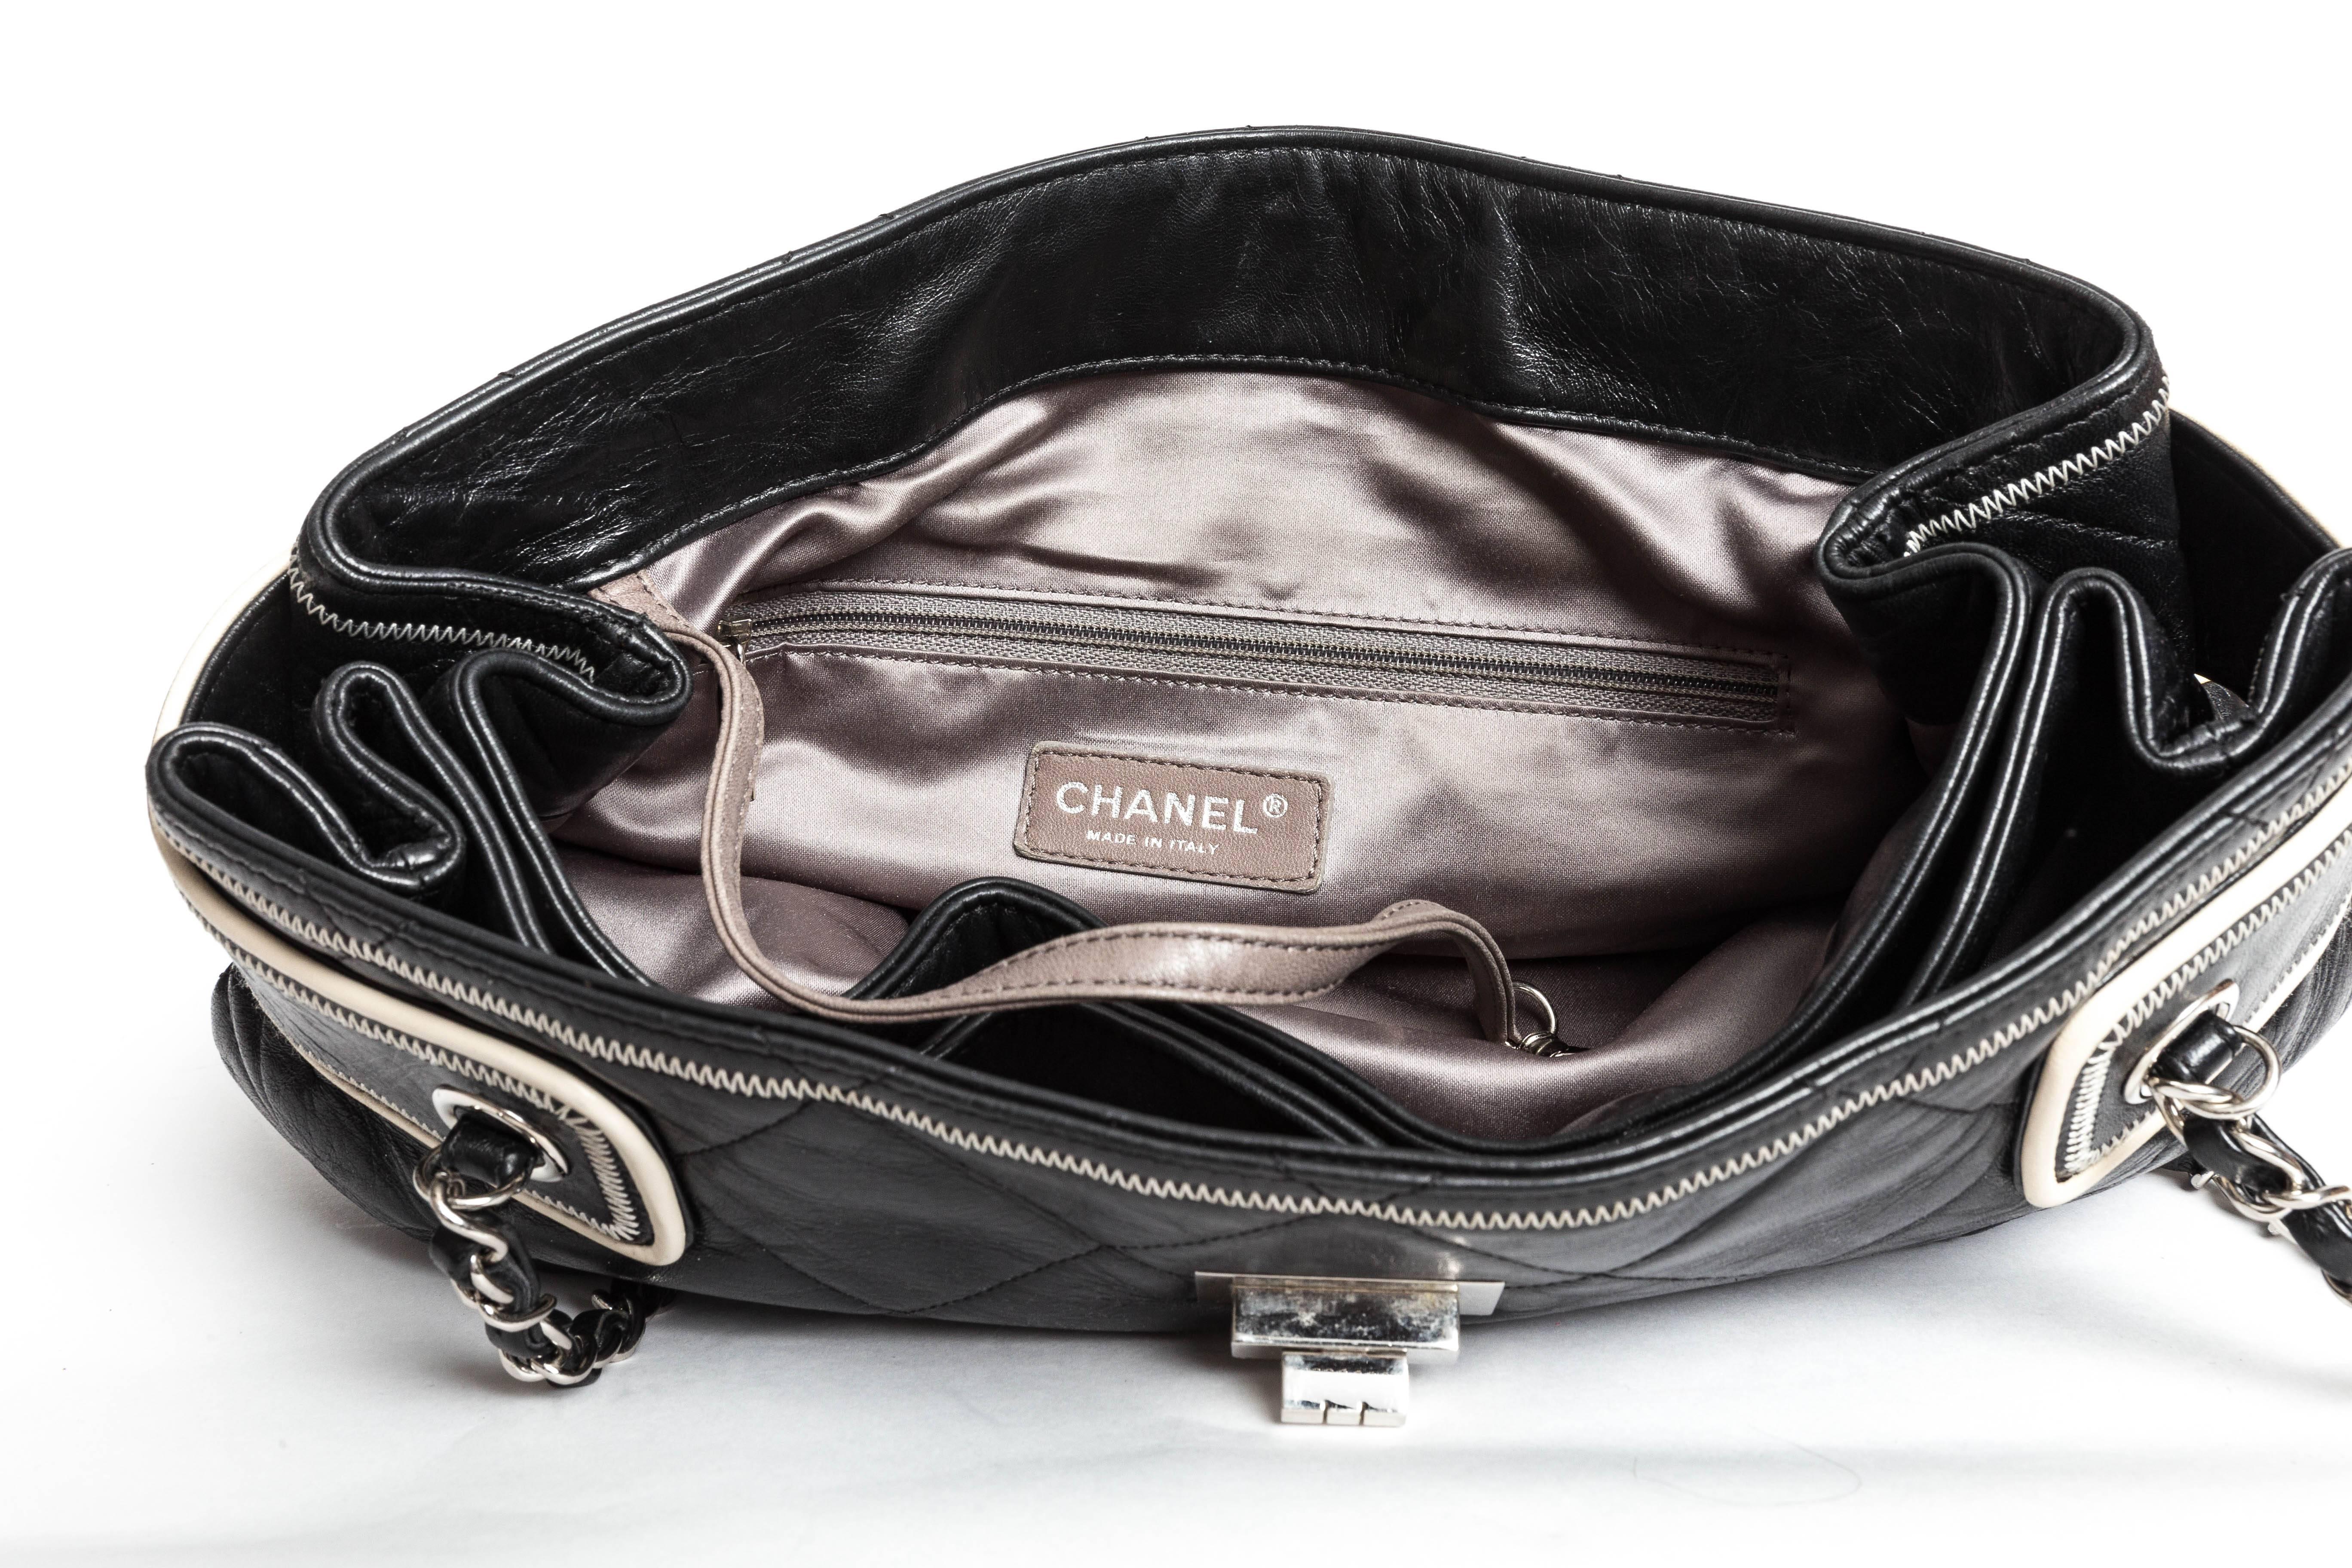 Chanel Black Leather Quilted Bag with Cream Leather Piping and Silver Hardware 2